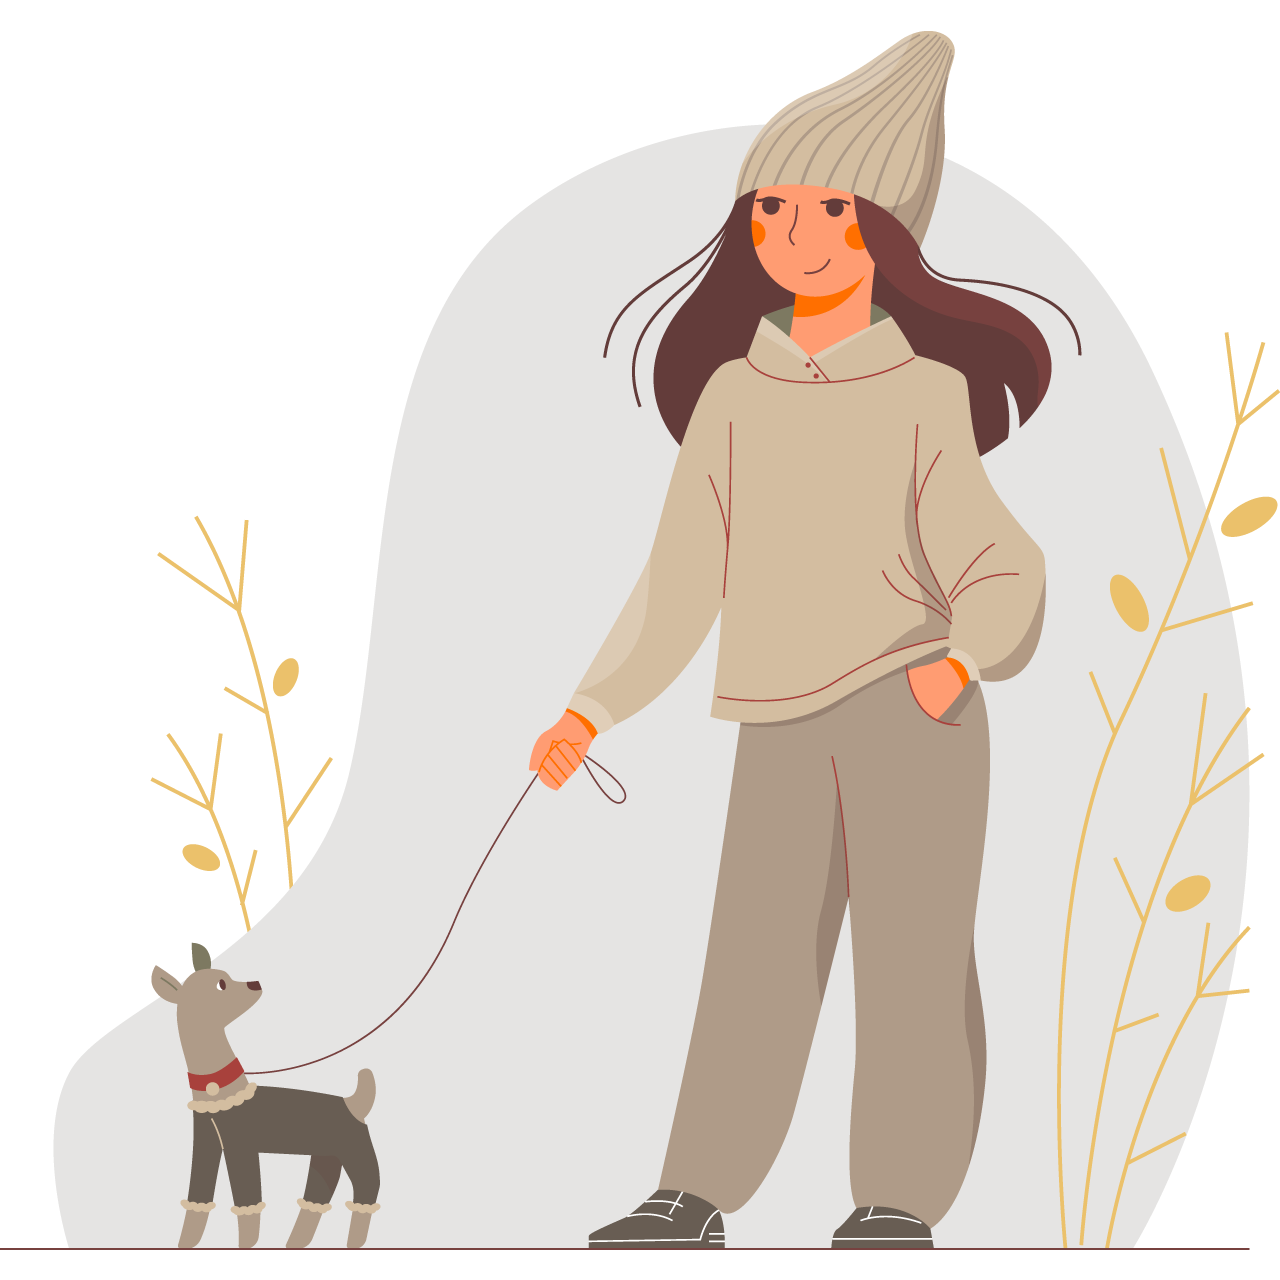 Cute cartoon young woman hoody walking with her little dog